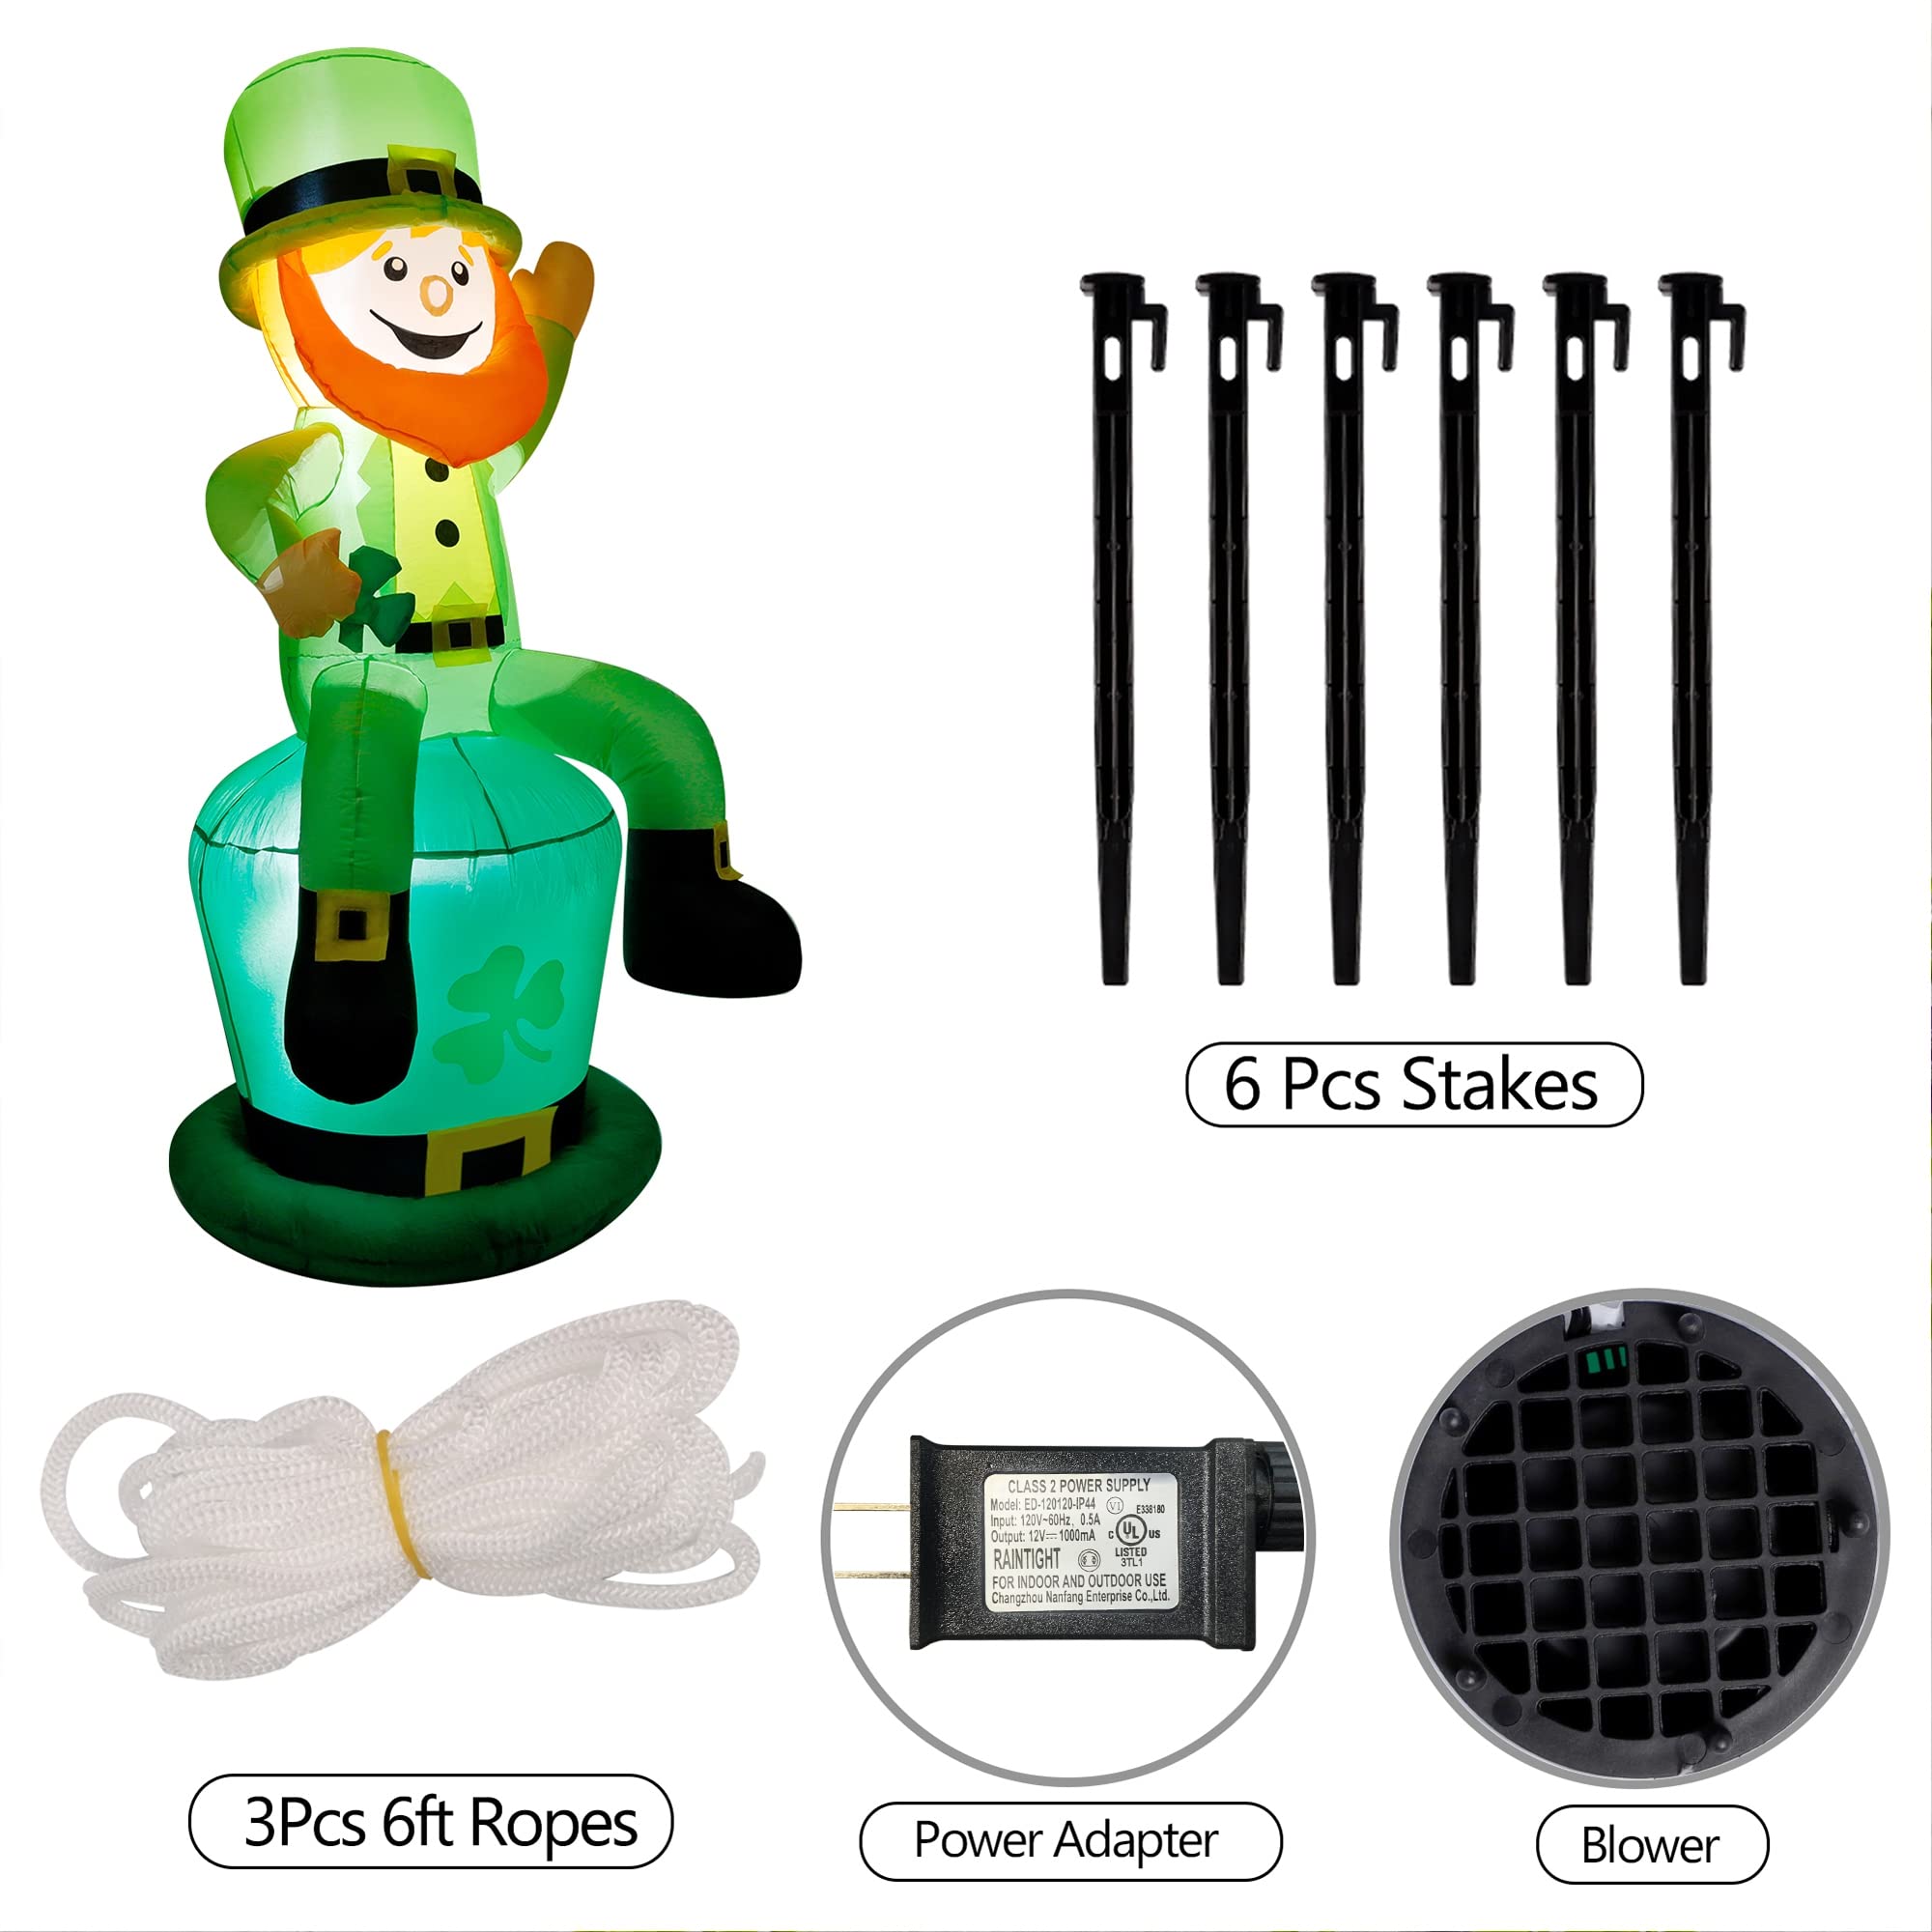 yofit 5 FT St. Patrick's Day Inflatable Leprechaun, Blow up Leprechaun Shamrock Outdoor Decoration with LED Lights, Perfect for Yard Garden Lawn Front Door Holiday Decor